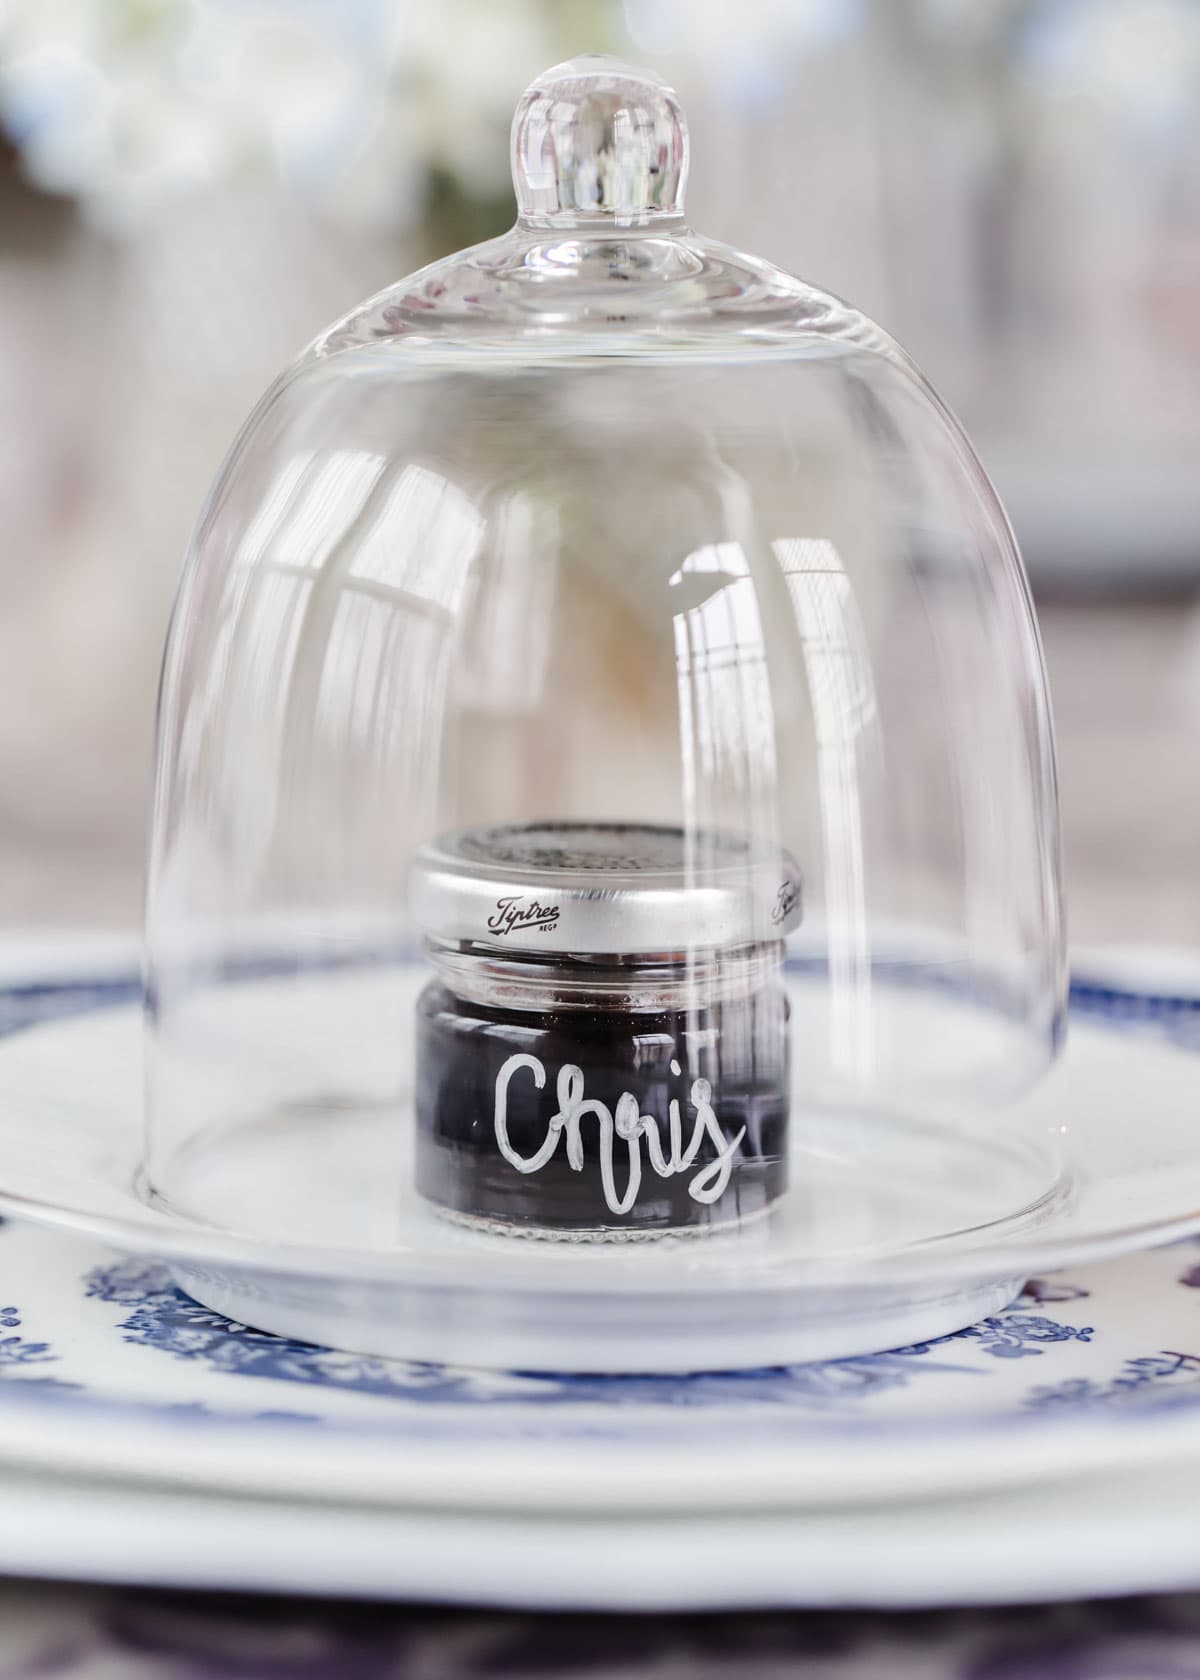 mini jelly jar with name written on it with marker, under glass cloche on dinner plate.